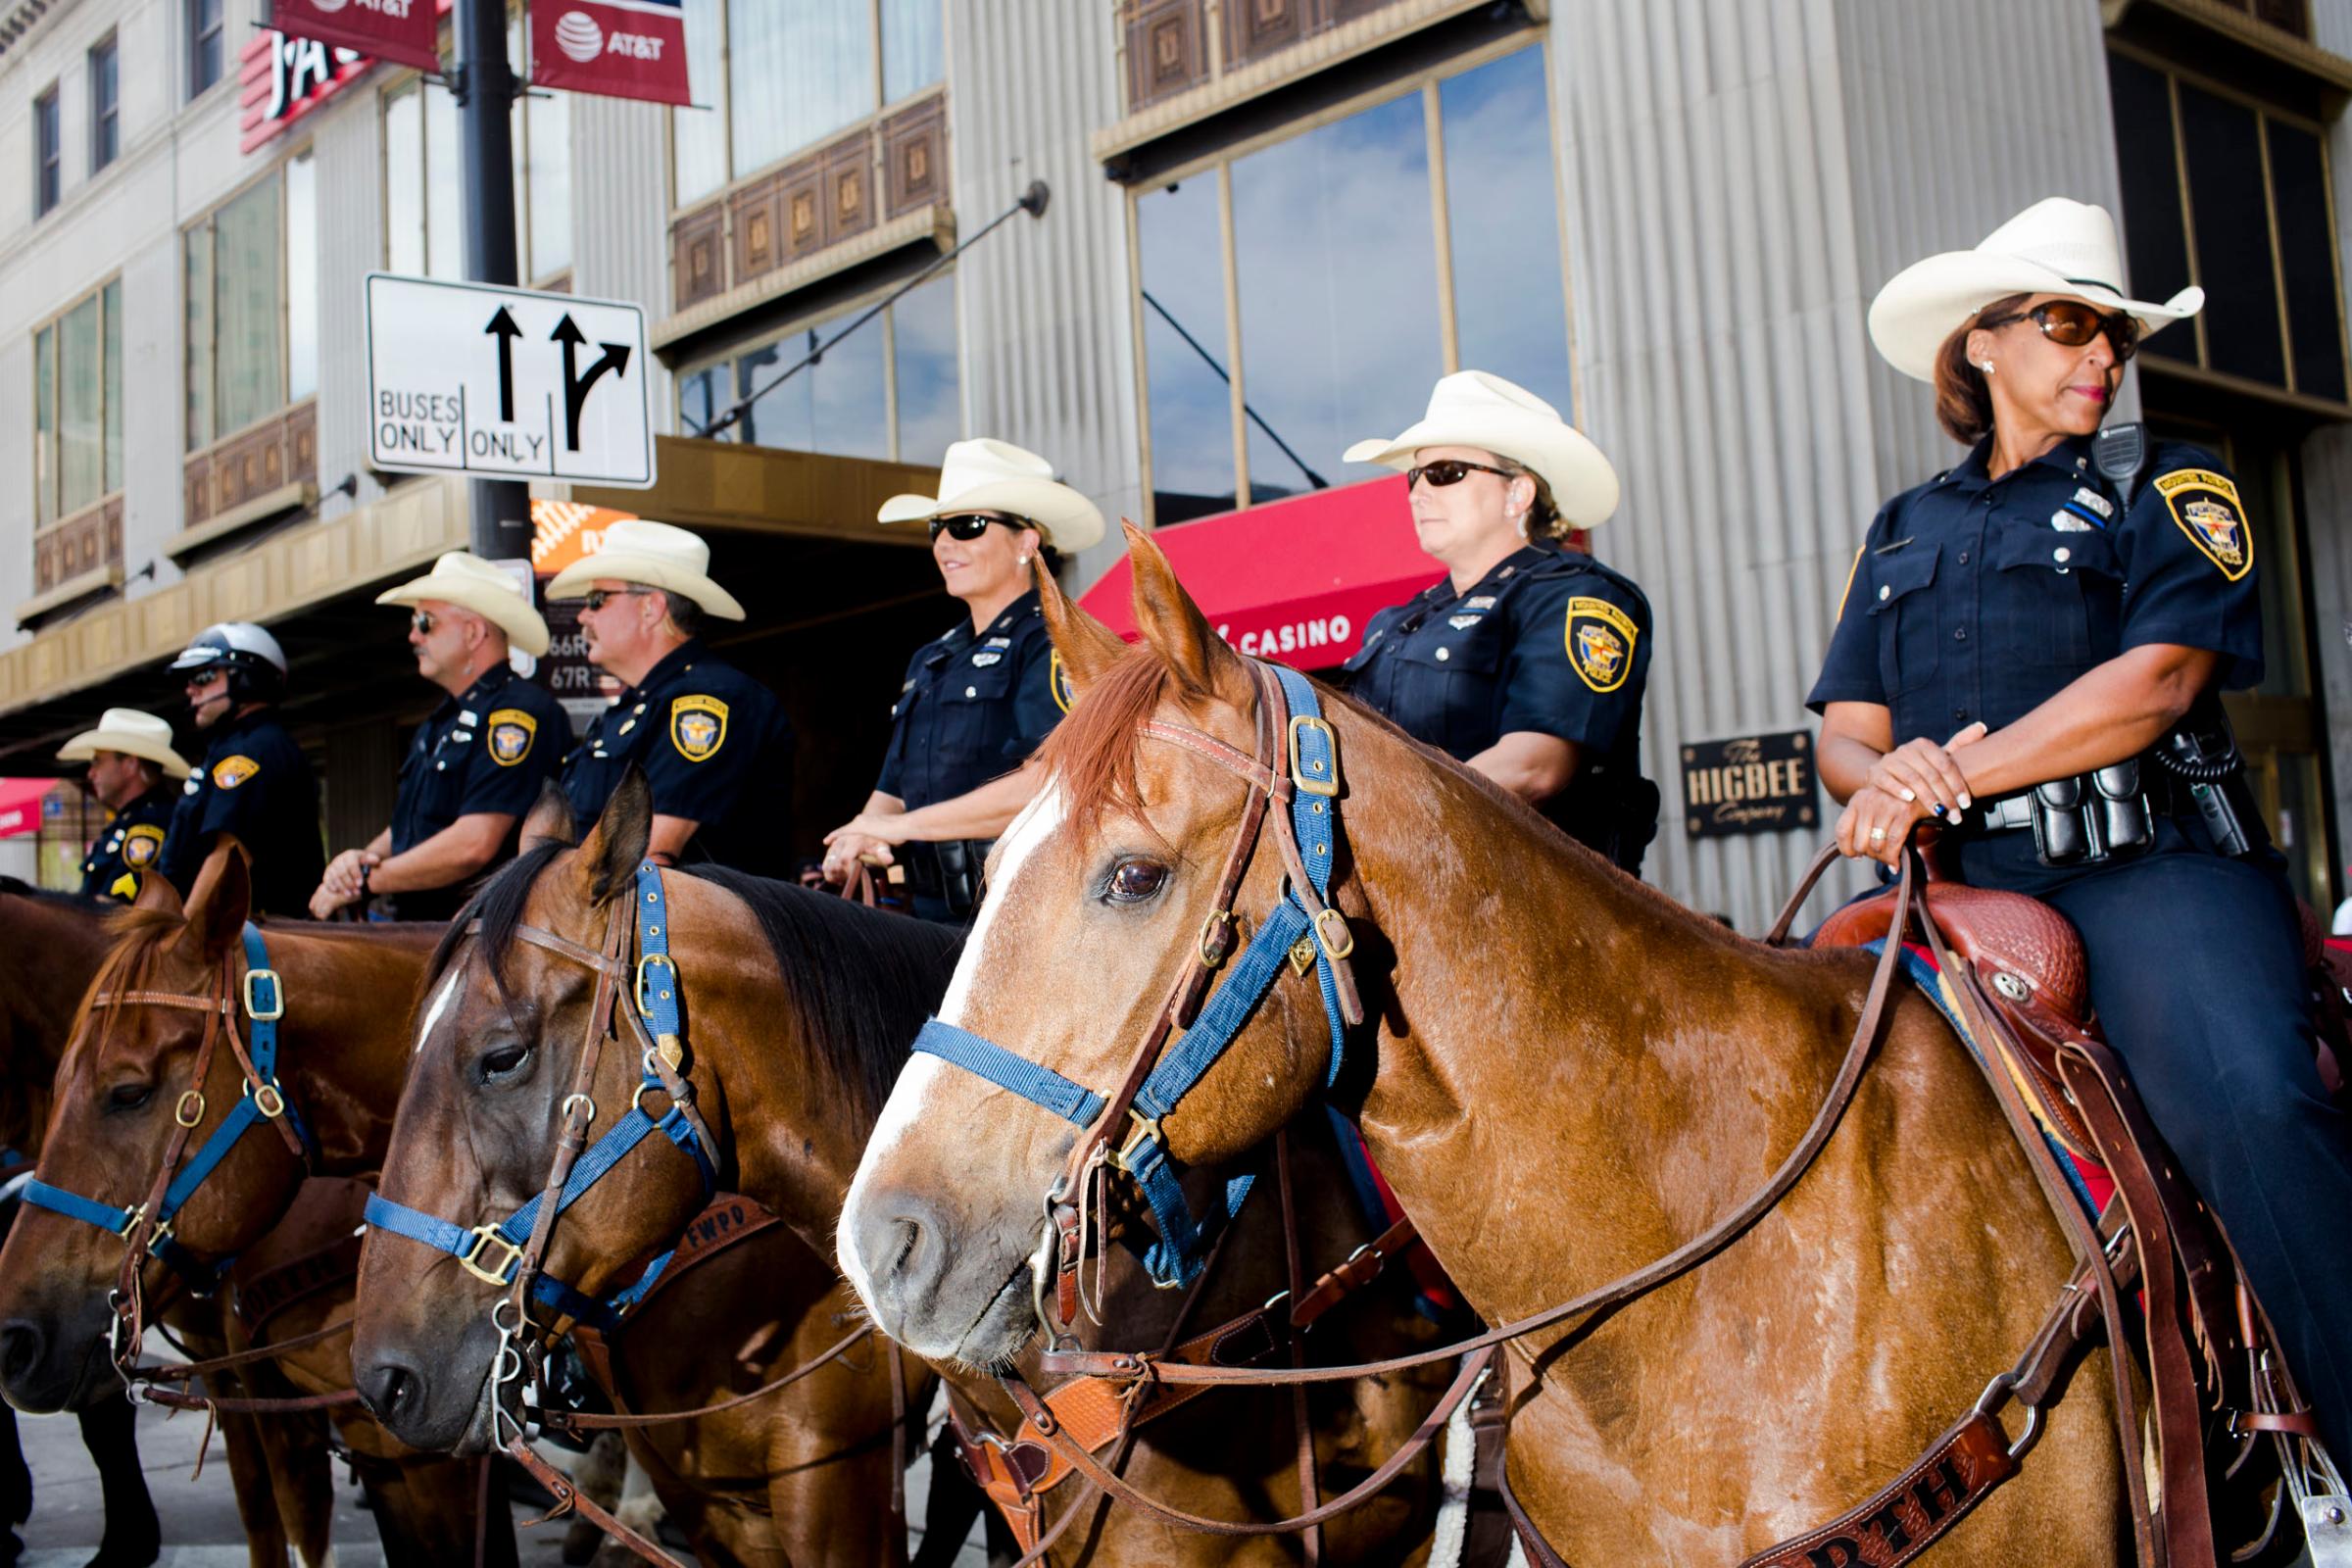 Mounted police from Fort Worth, Texas monitor the 2016 Republican National Convention in Cleveland on Wednesday, July 20, 2016.